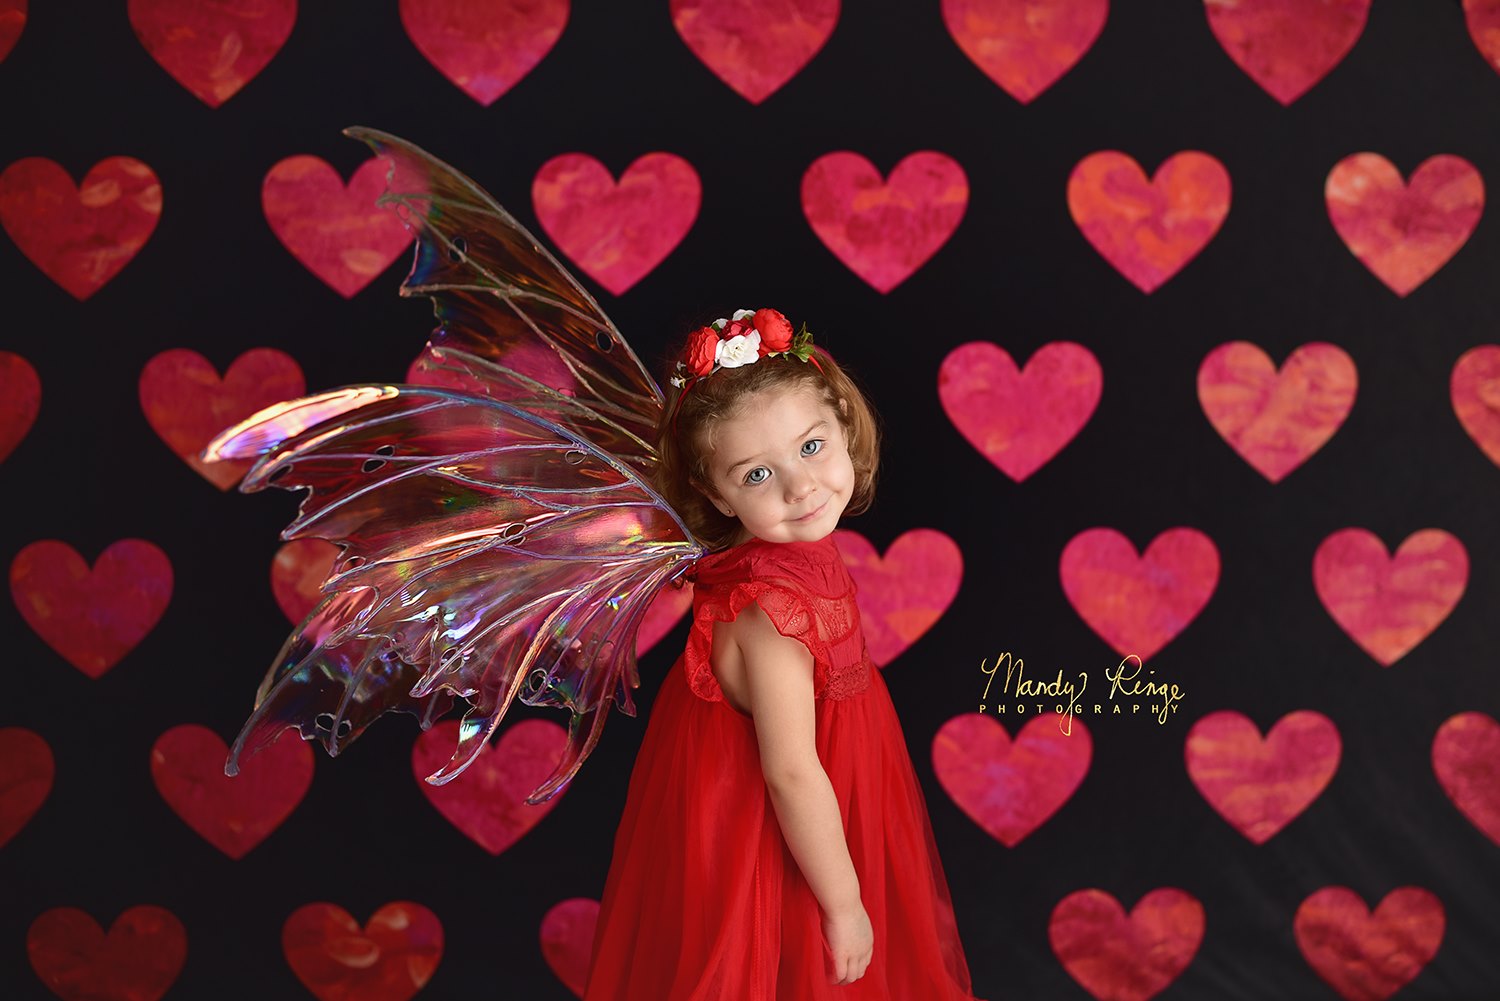 Kate Painted Heart Pattern Valentines Backdrop Designed By Mandy Ringe Photography - Kate Backdrop